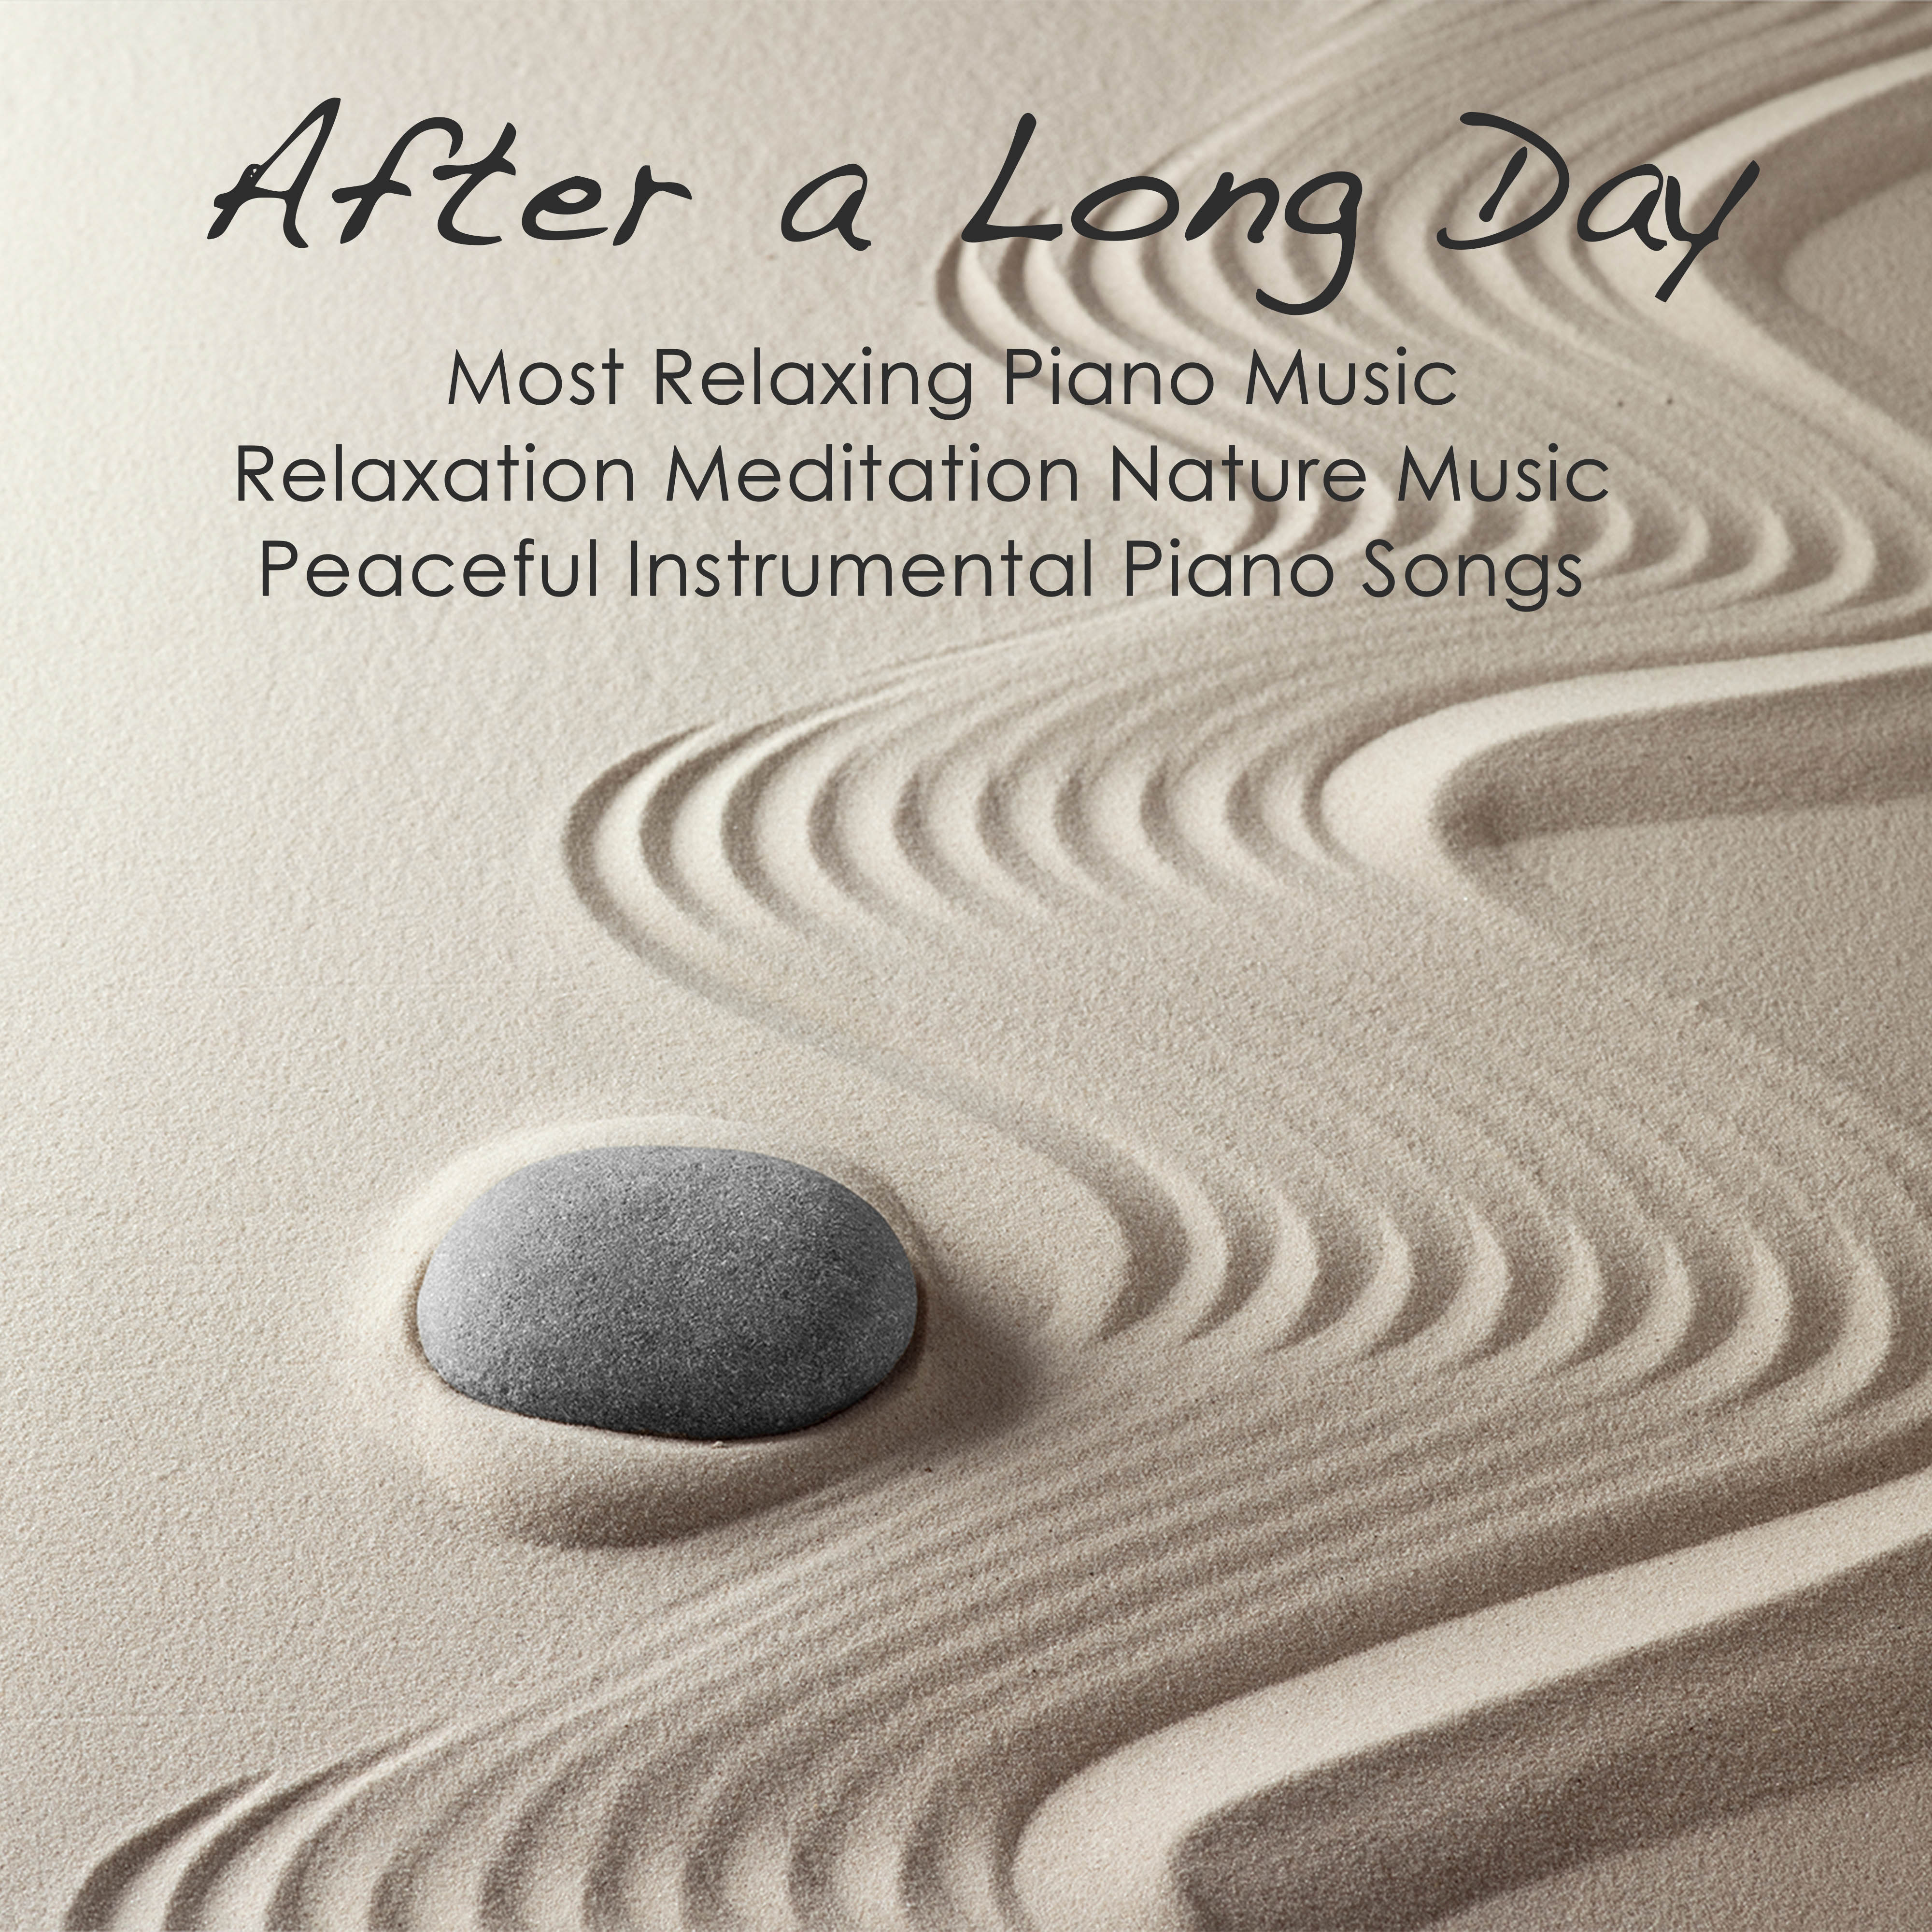 After a Long Day: Most Relaxing Piano Music, Relaxation Meditation Nature Music & Peaceful Instrumental Piano Songs